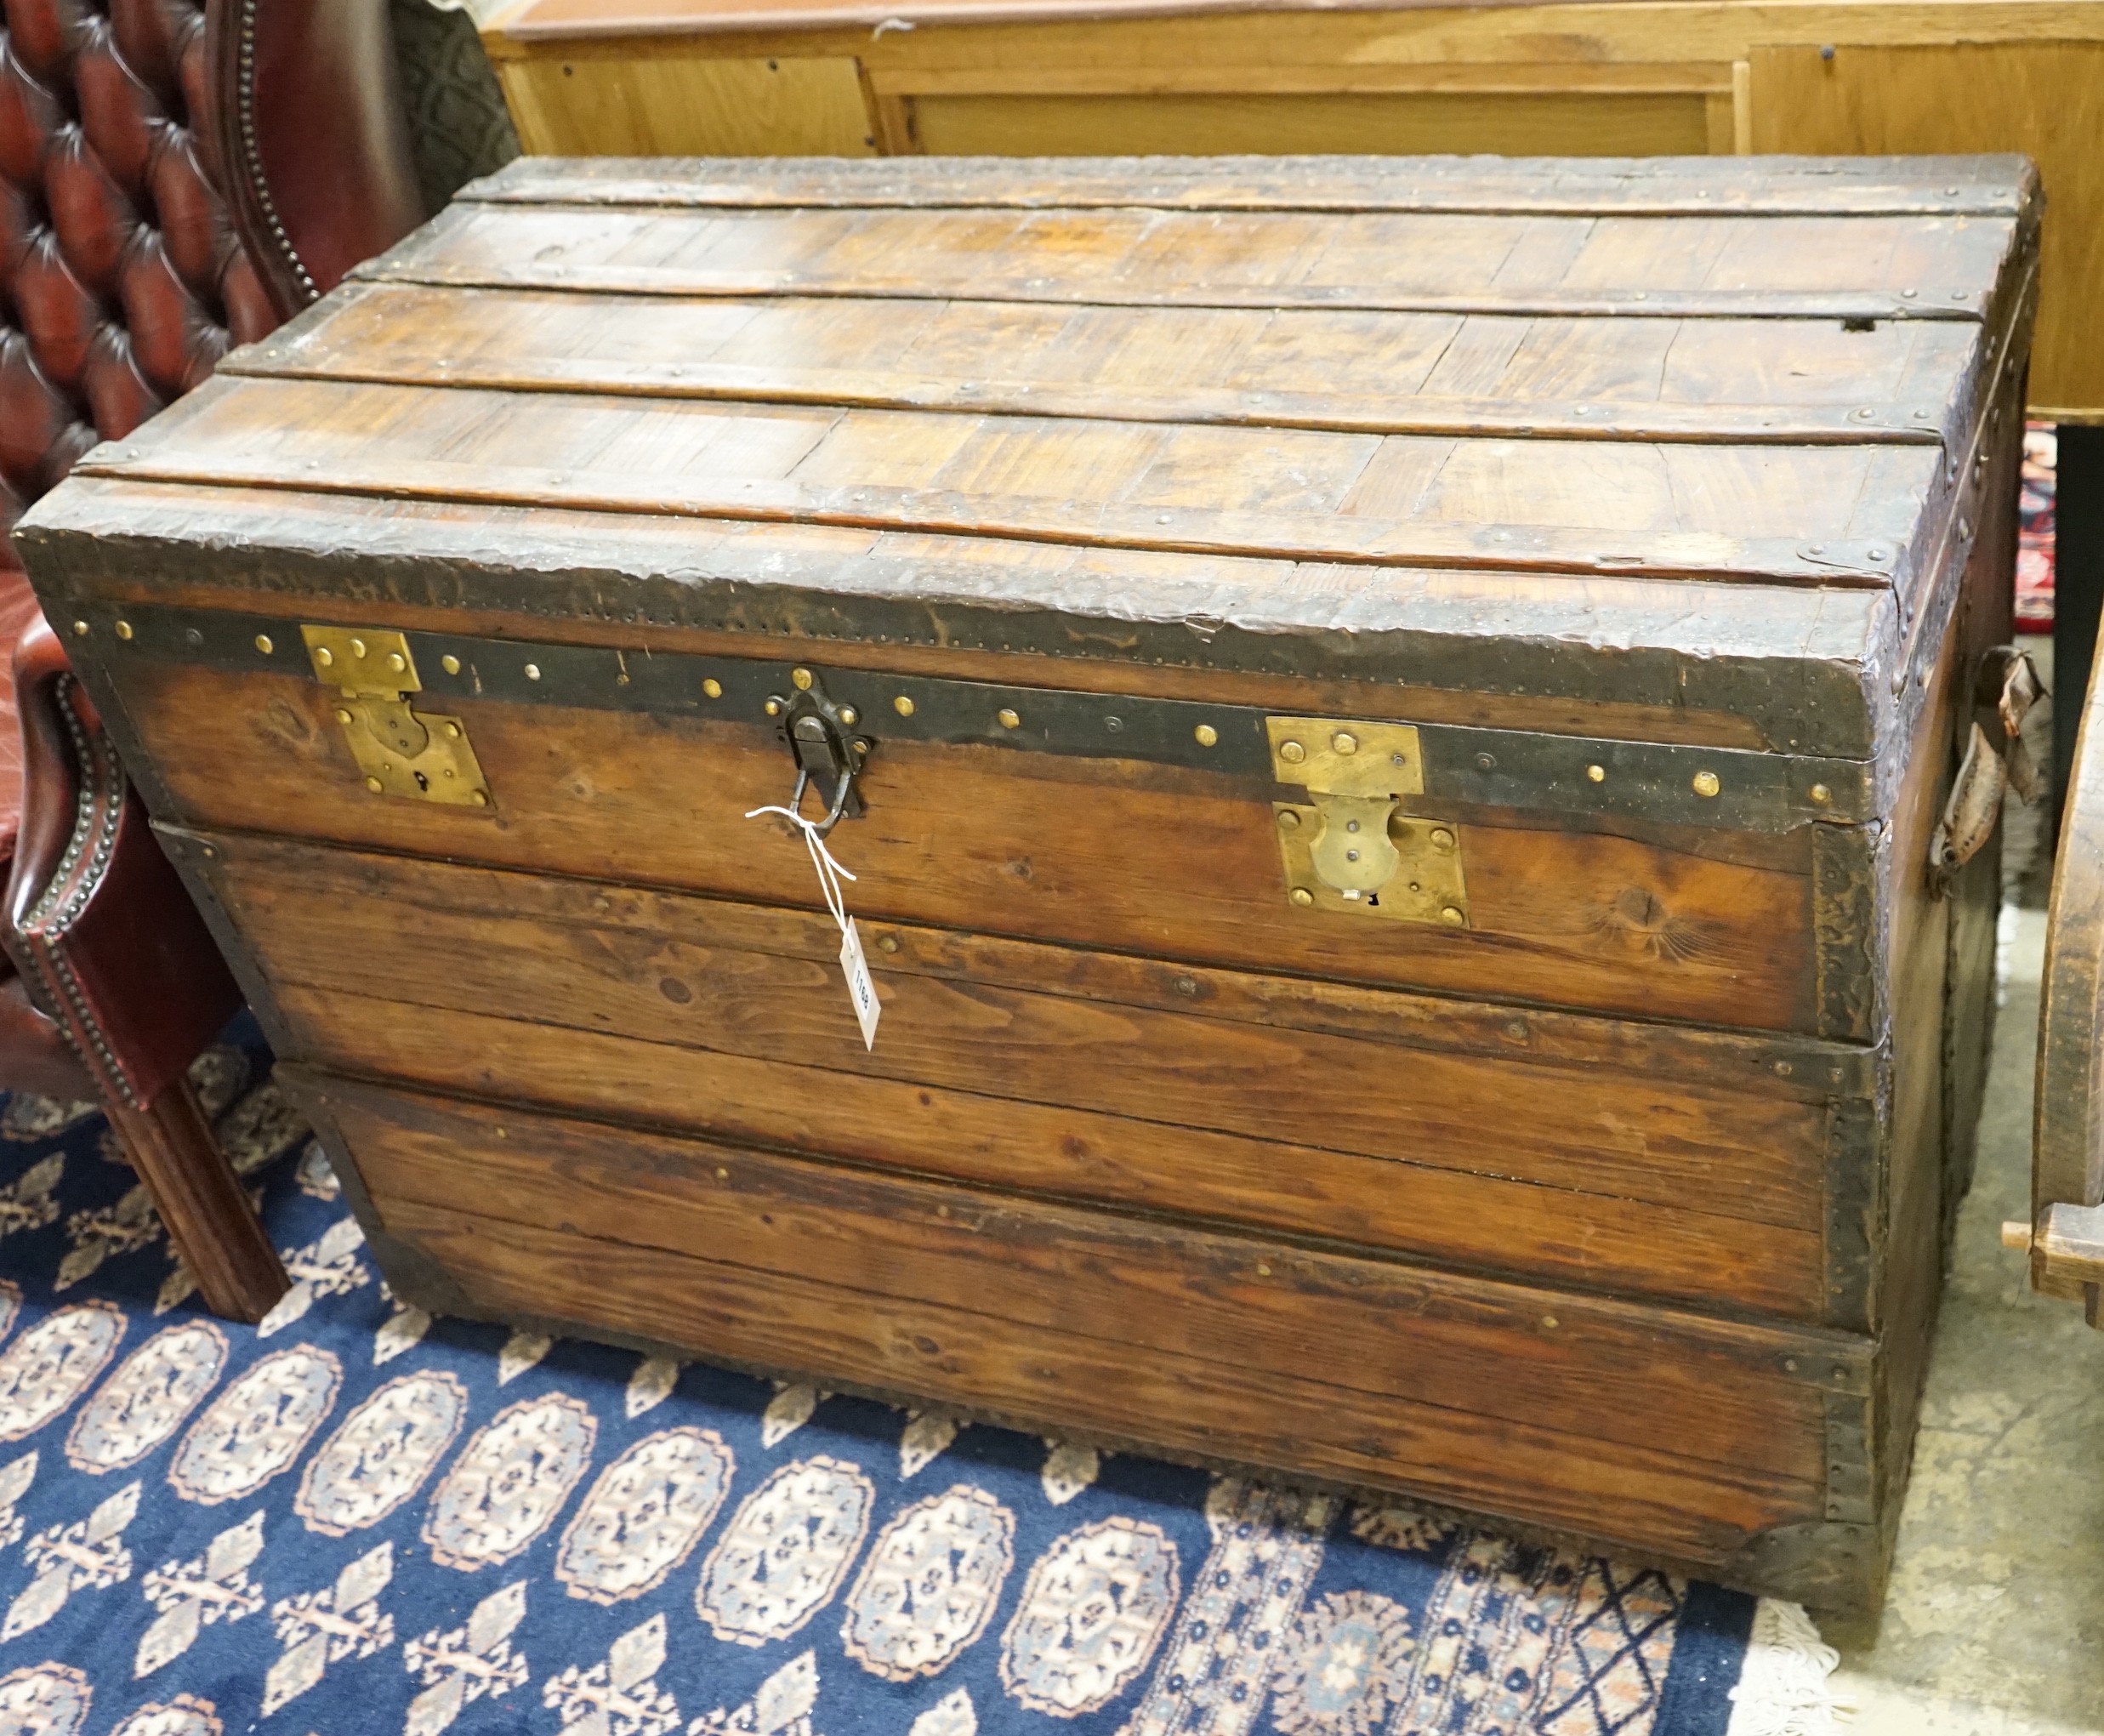 A Victorian iron and brass mounted trunk, length 109cm, depth 54cm, height 70cm